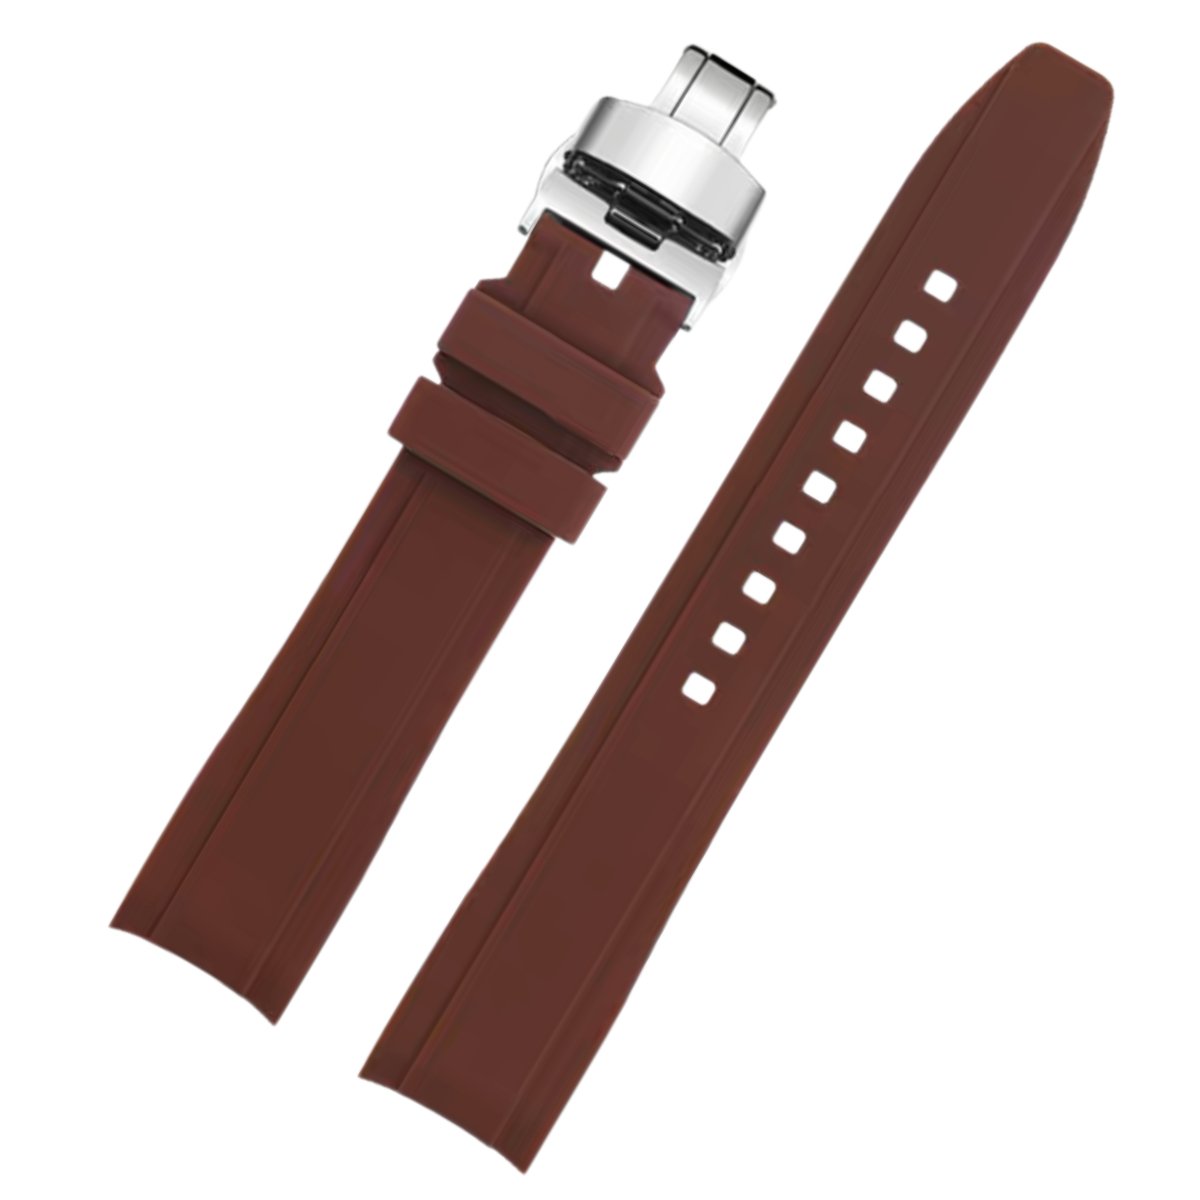 Dexter Silicone Curved Lug End Strap Brown (Silver Deployment Clasp) (Rolex Replacement) -StrapSeeker